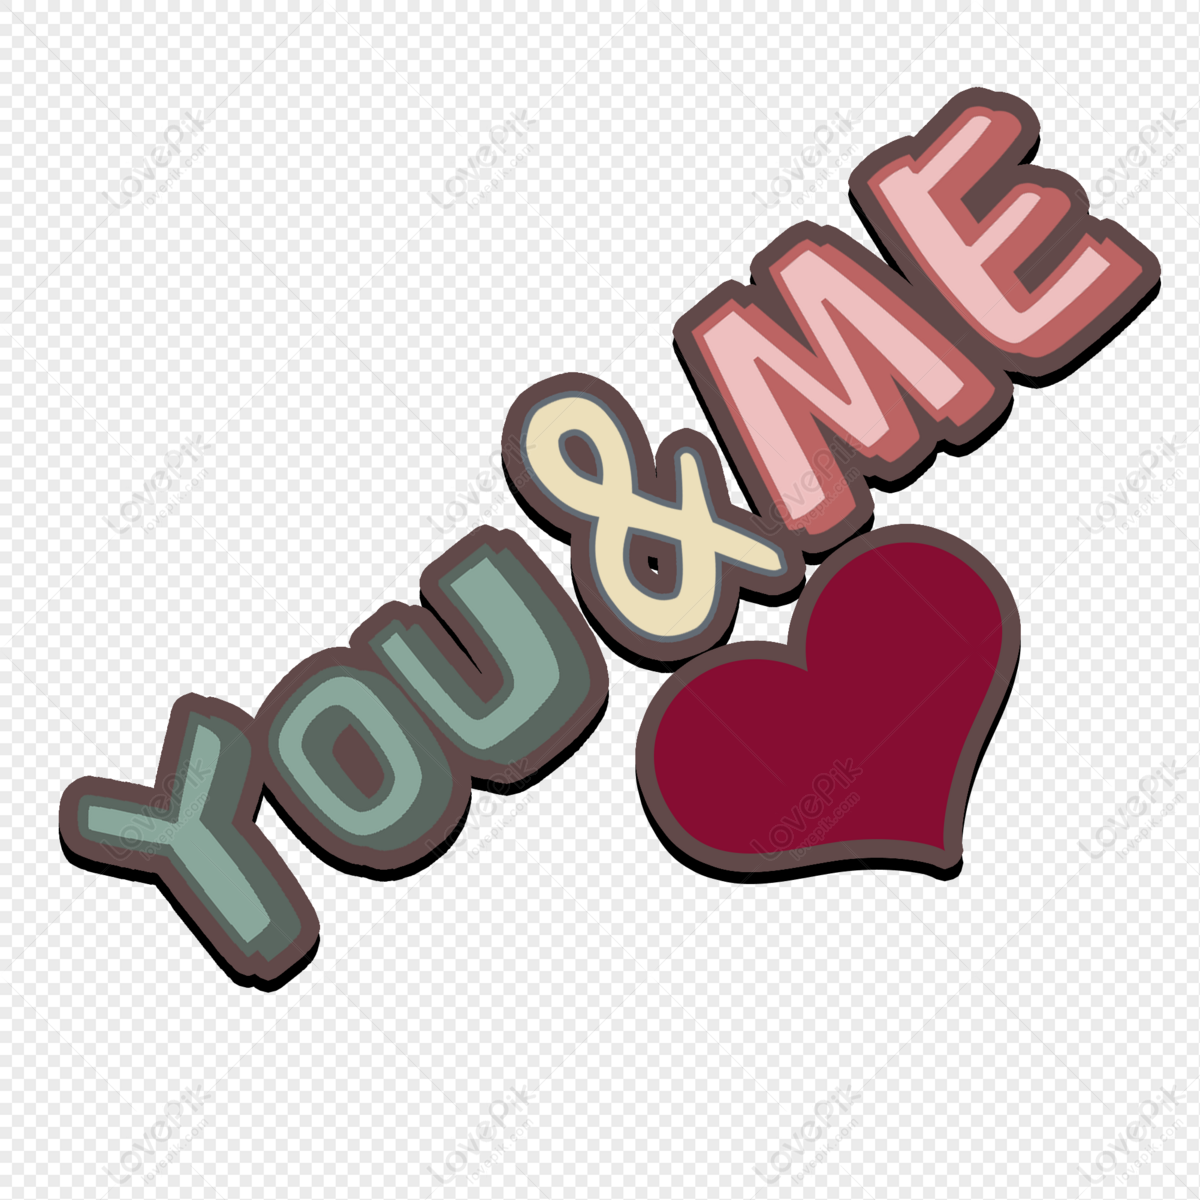 You And Me PNG Image Free Download And Clipart Image For Free ...